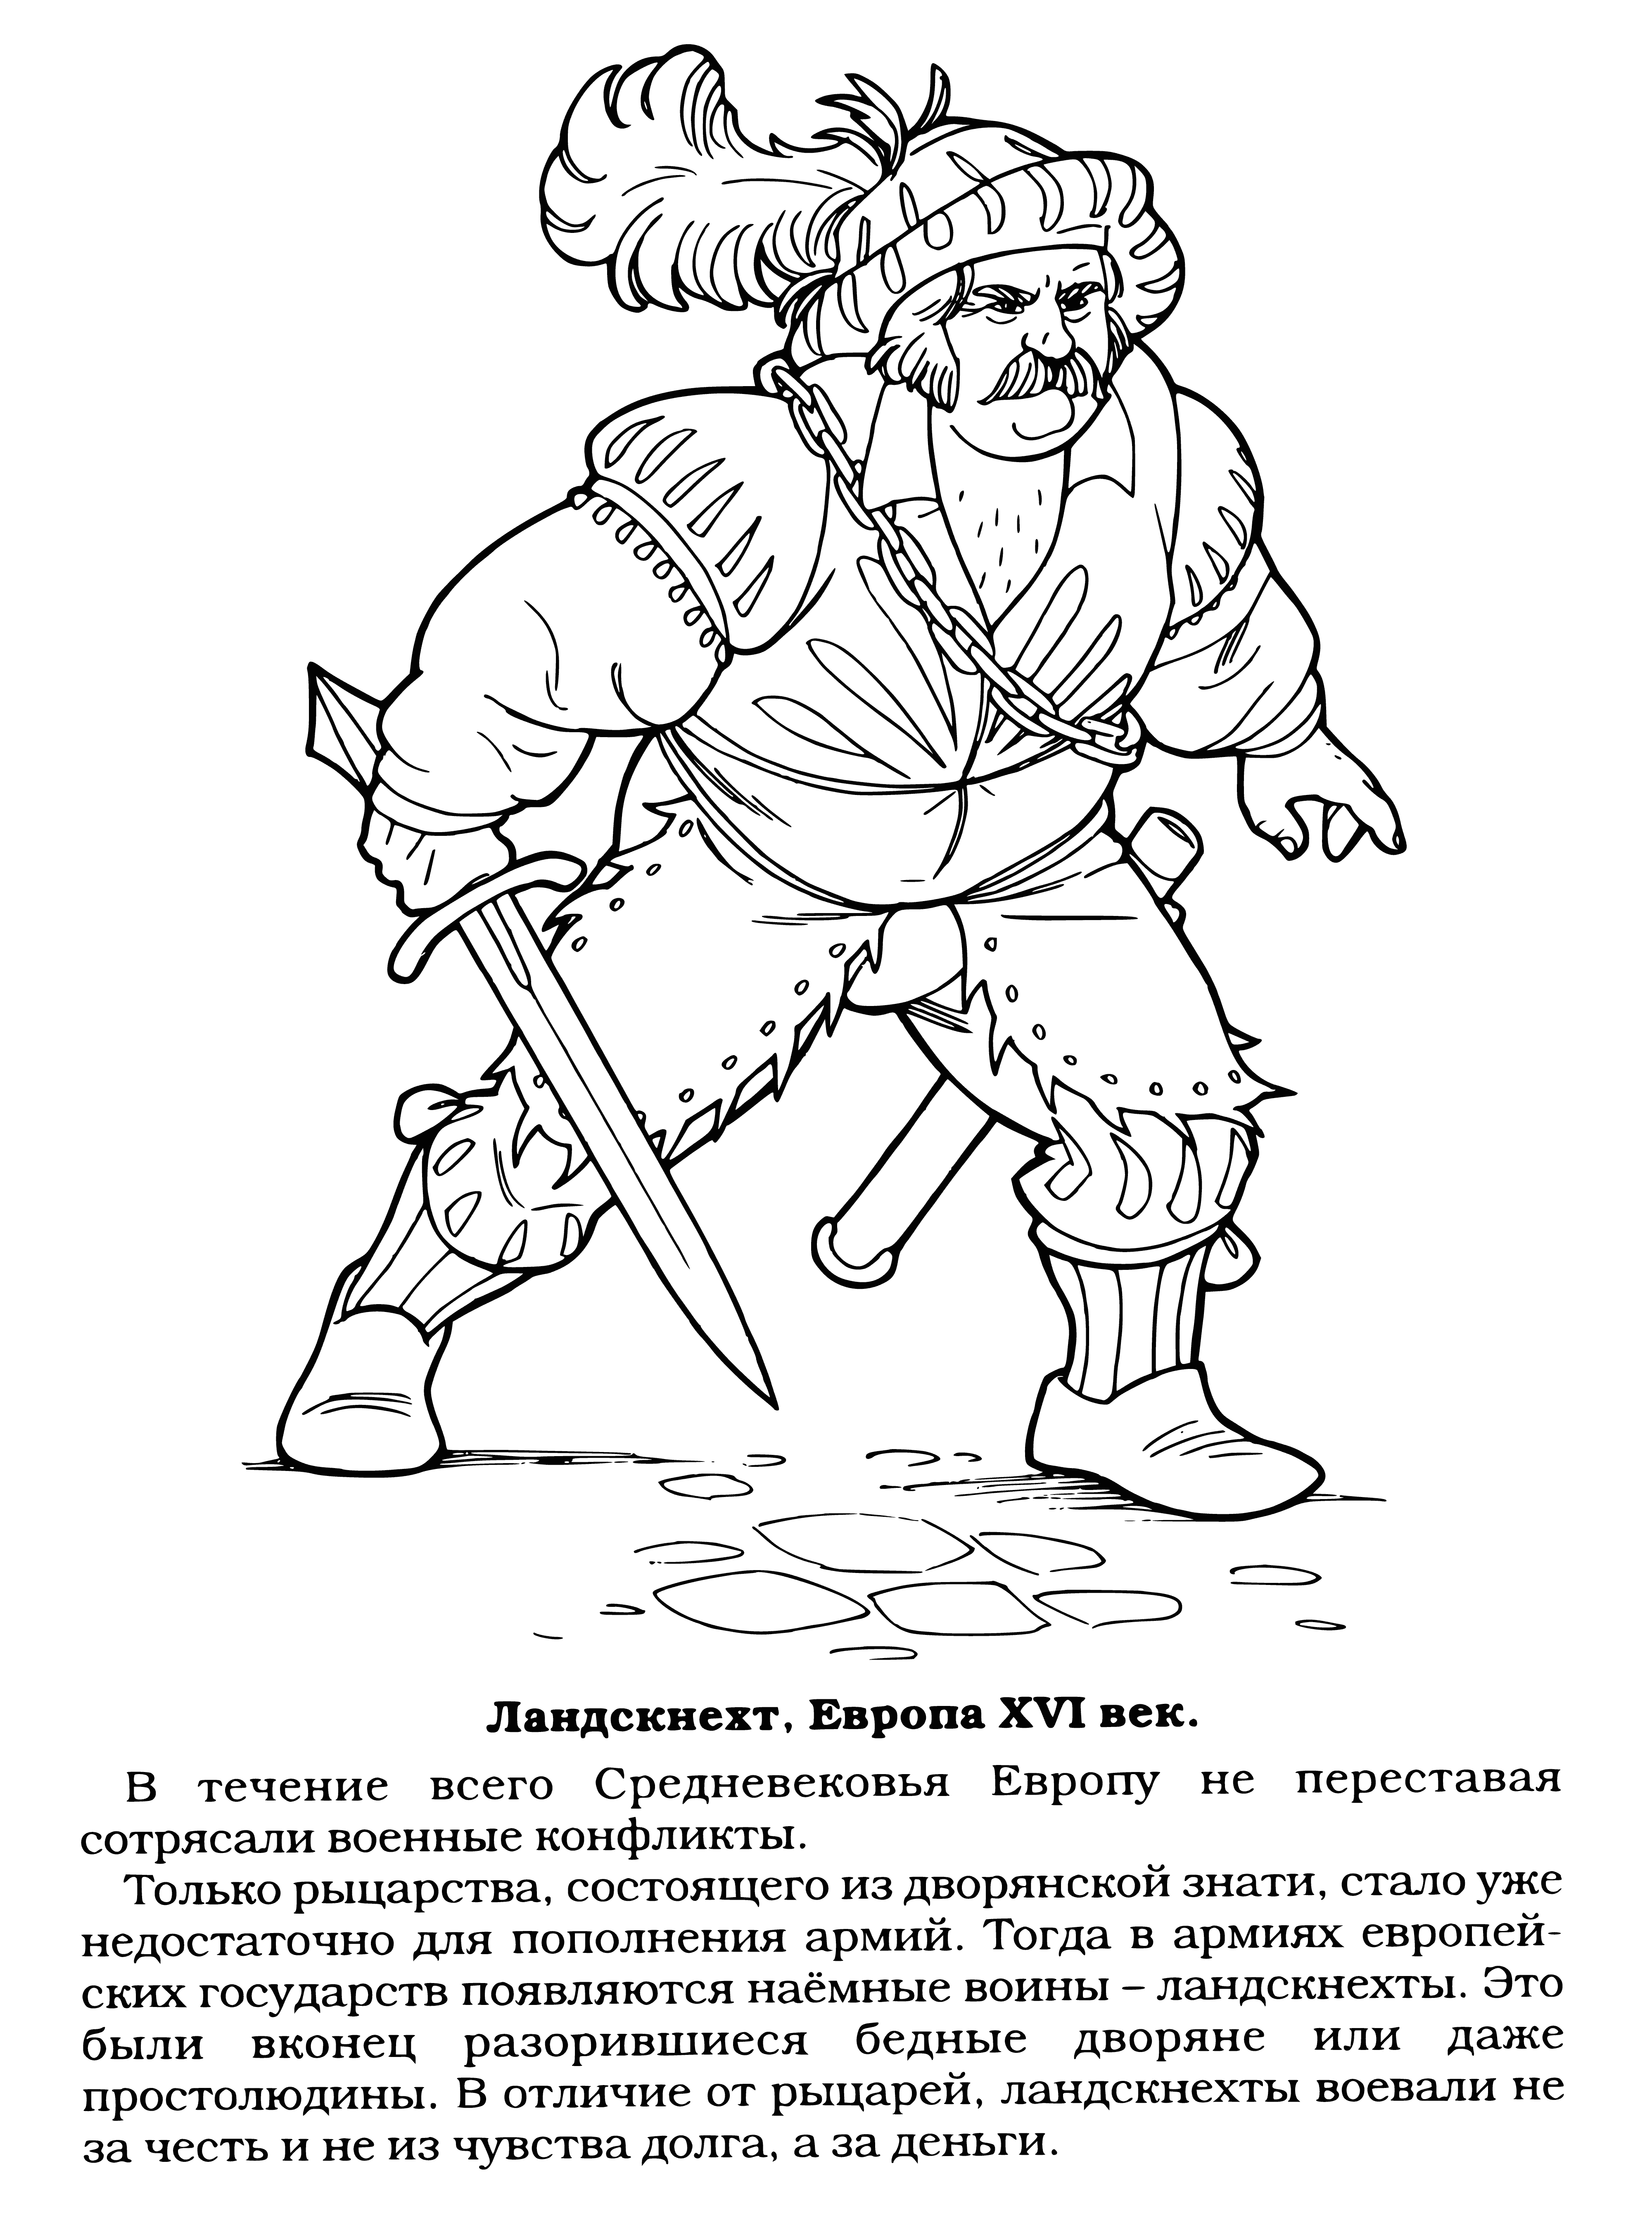 coloring page: Group of warriors with swords & shields, clad in metal armor, each with unique helmets. Ready to fight for their lives and the cause they were hired for.